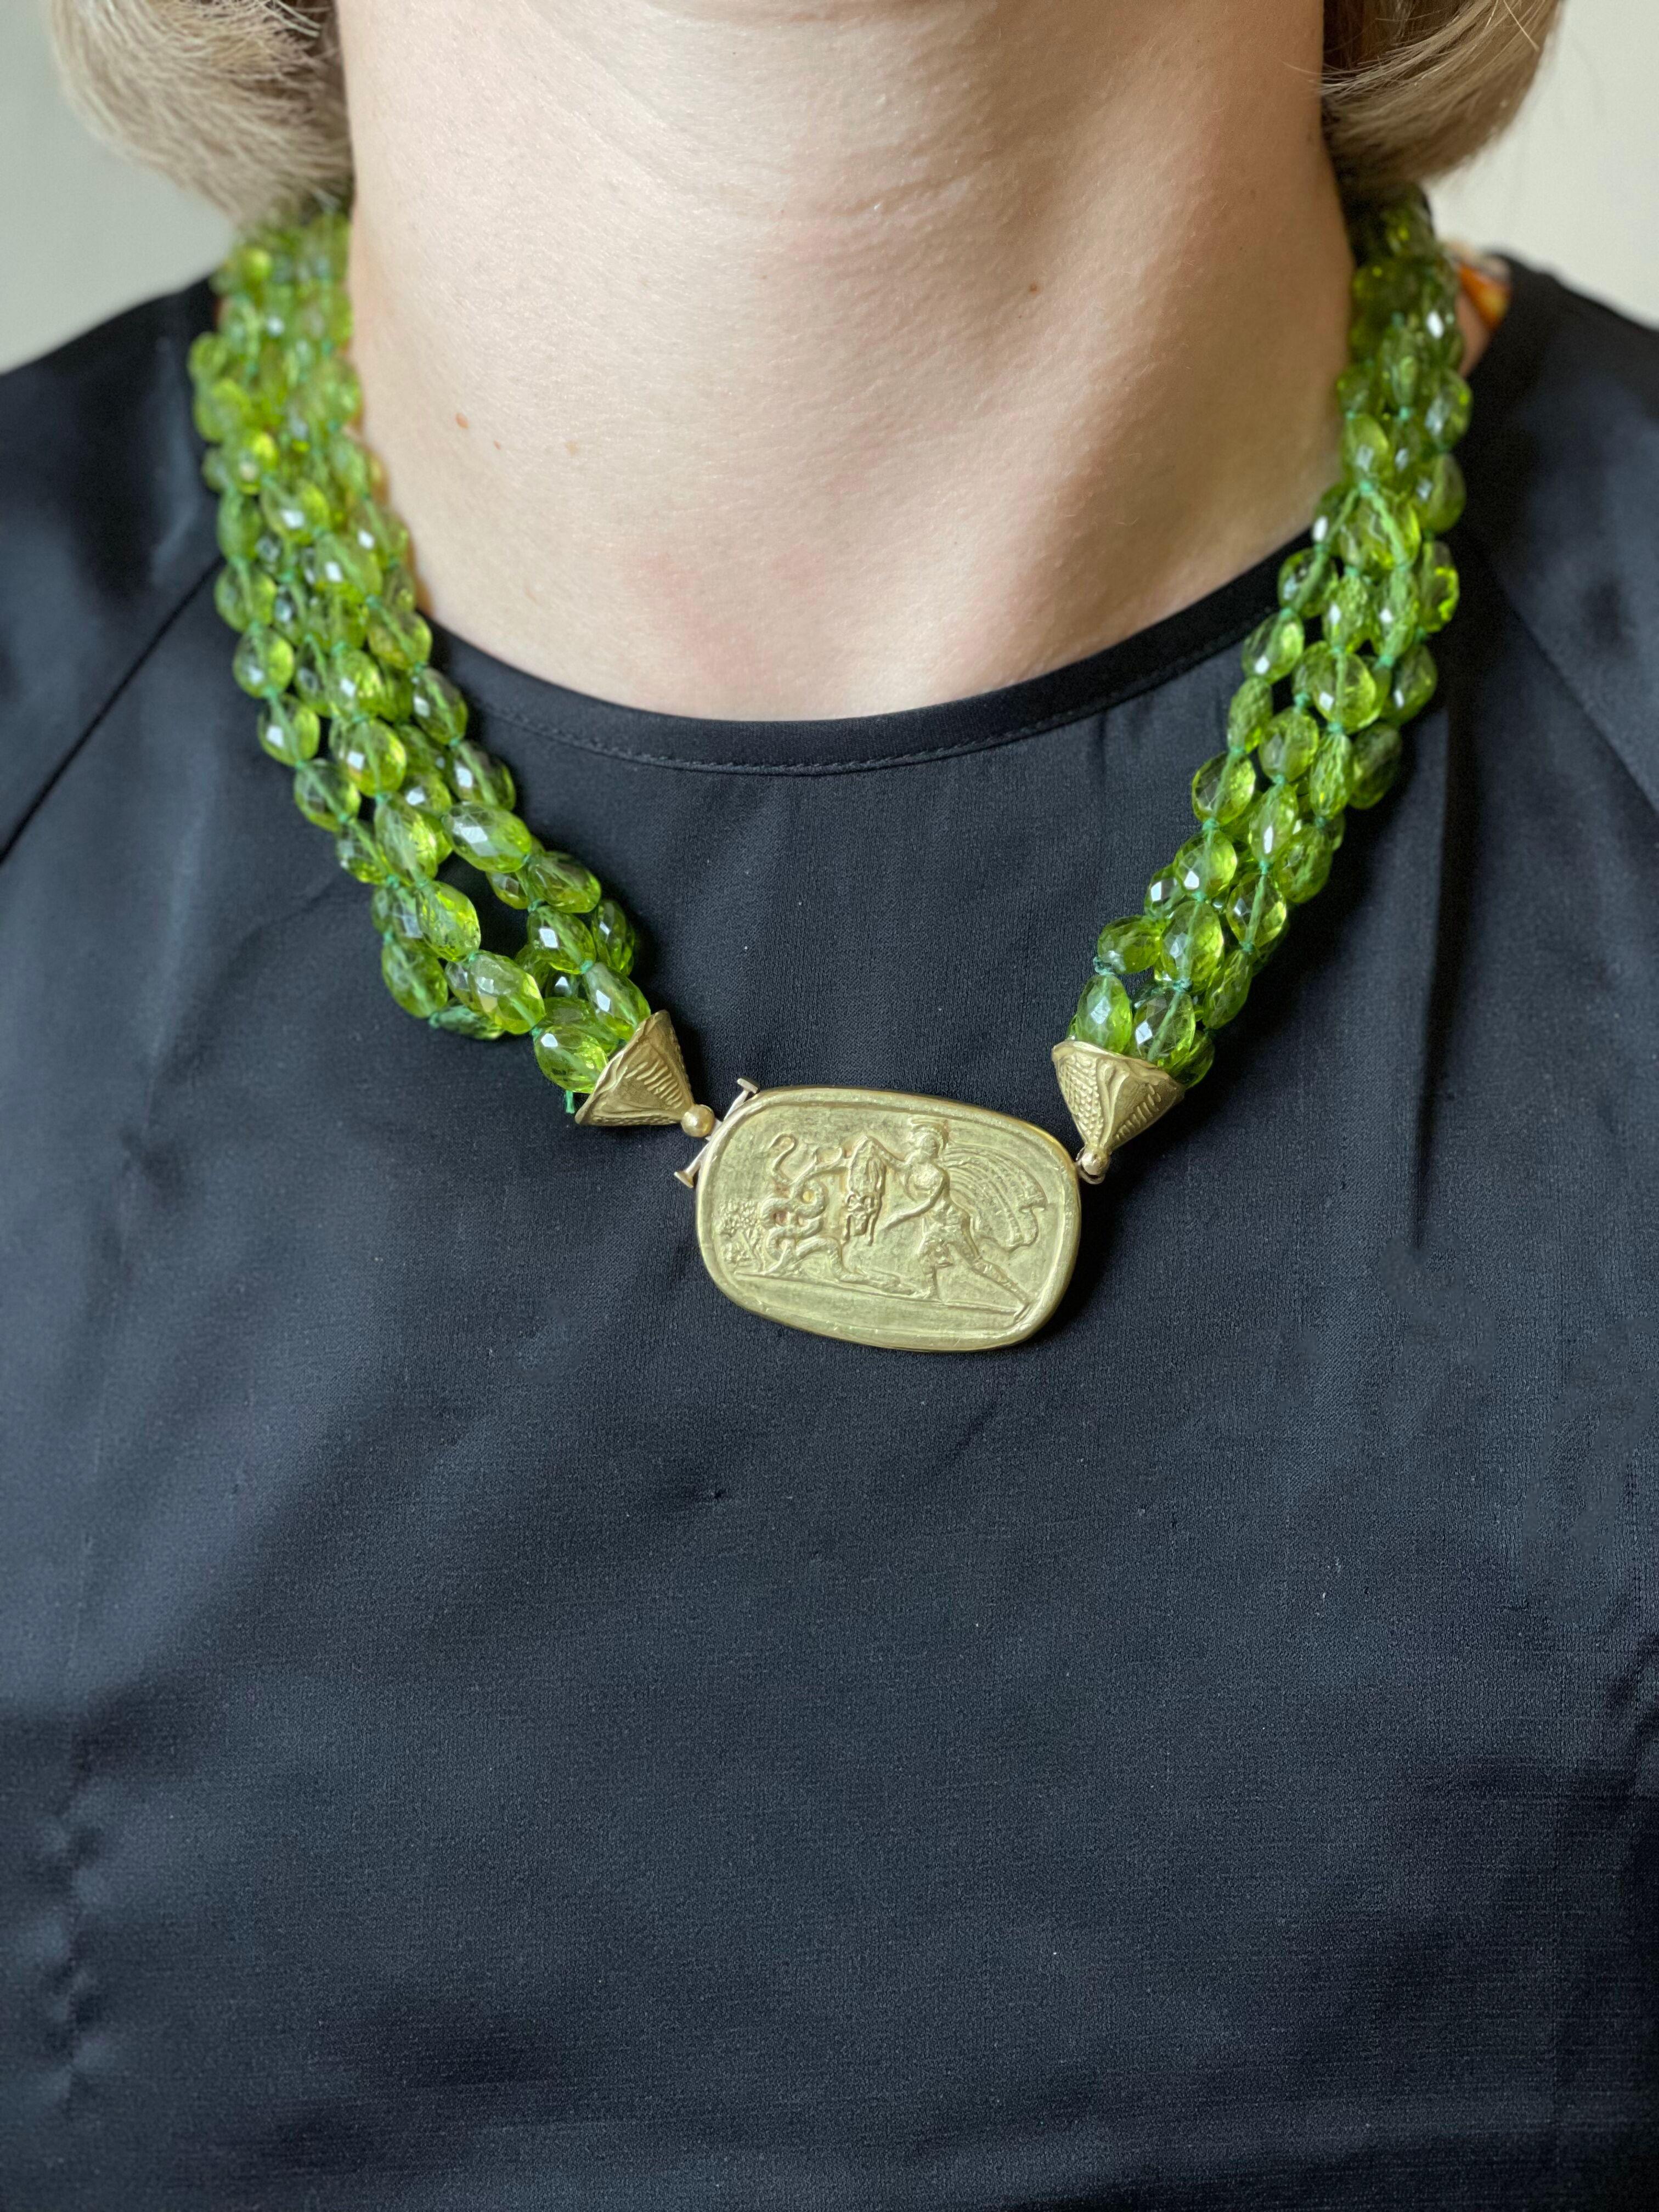 18k gold necklace with 5 strands of faceted peridot gemstones. The center pendant depicts  roman soldier. Necklace is 21